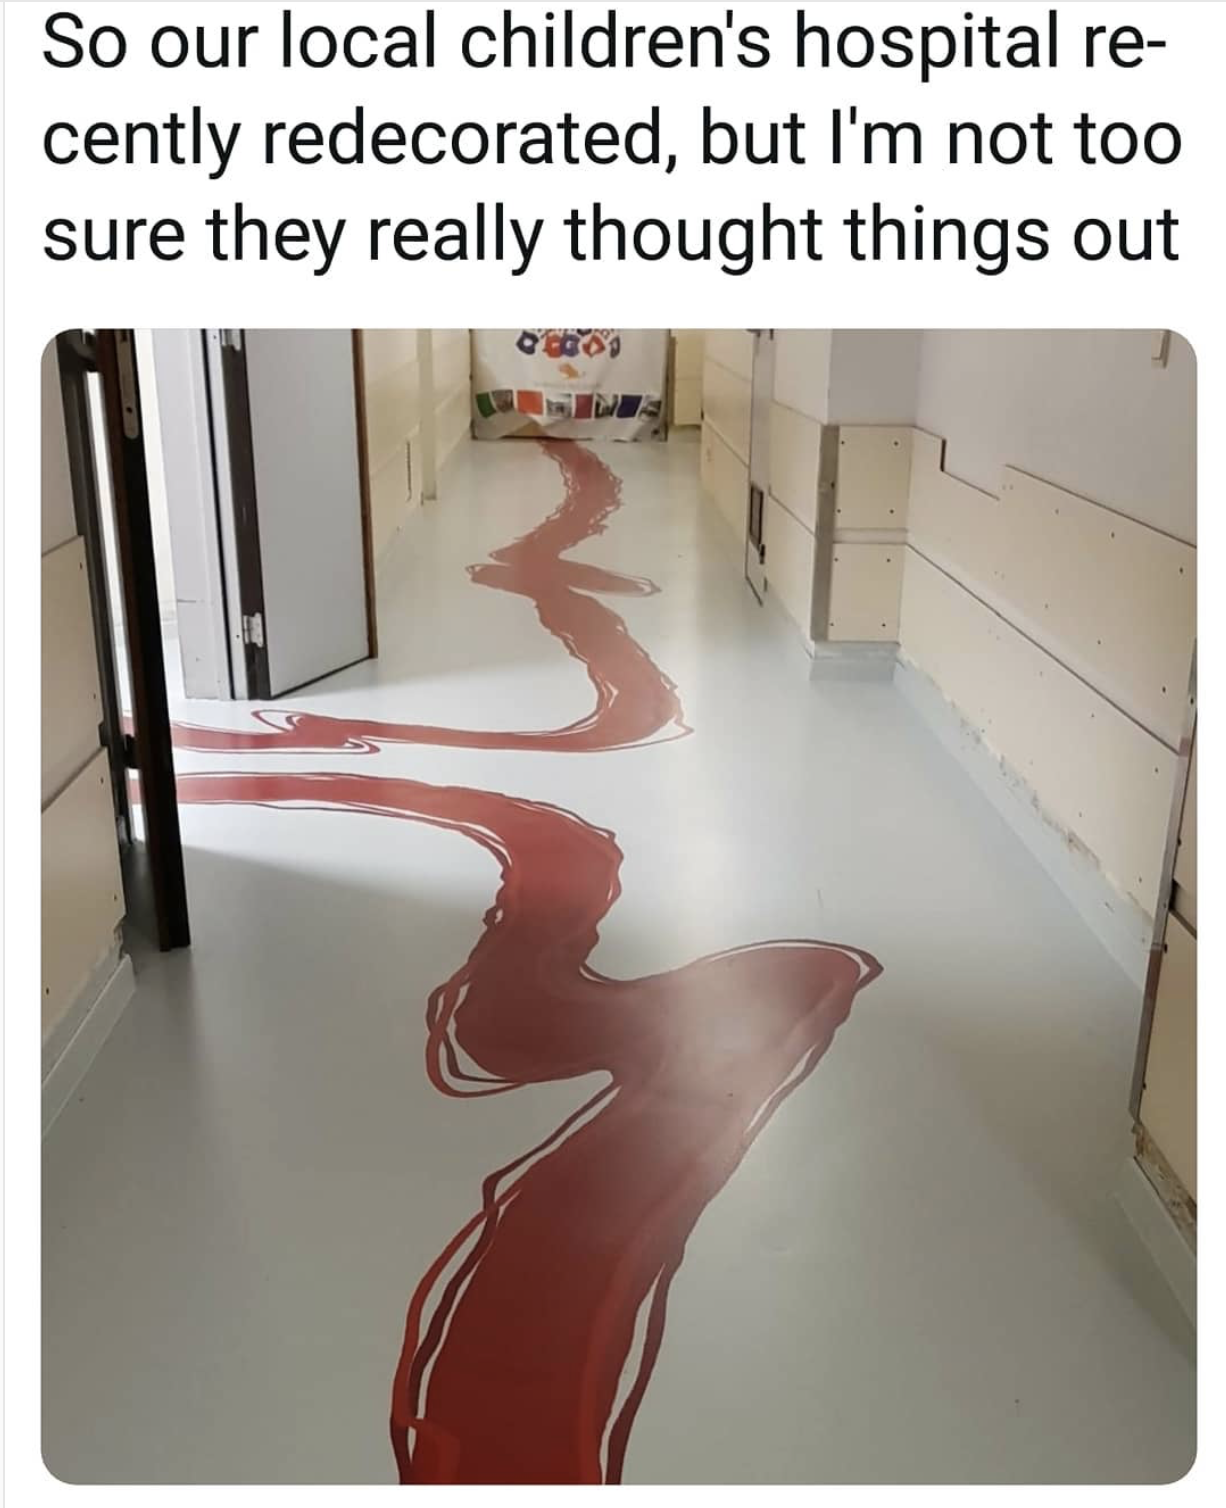 children's hospital blood trail - So our local children's hospital re cently redecorated, but I'm not too sure they really thought things out